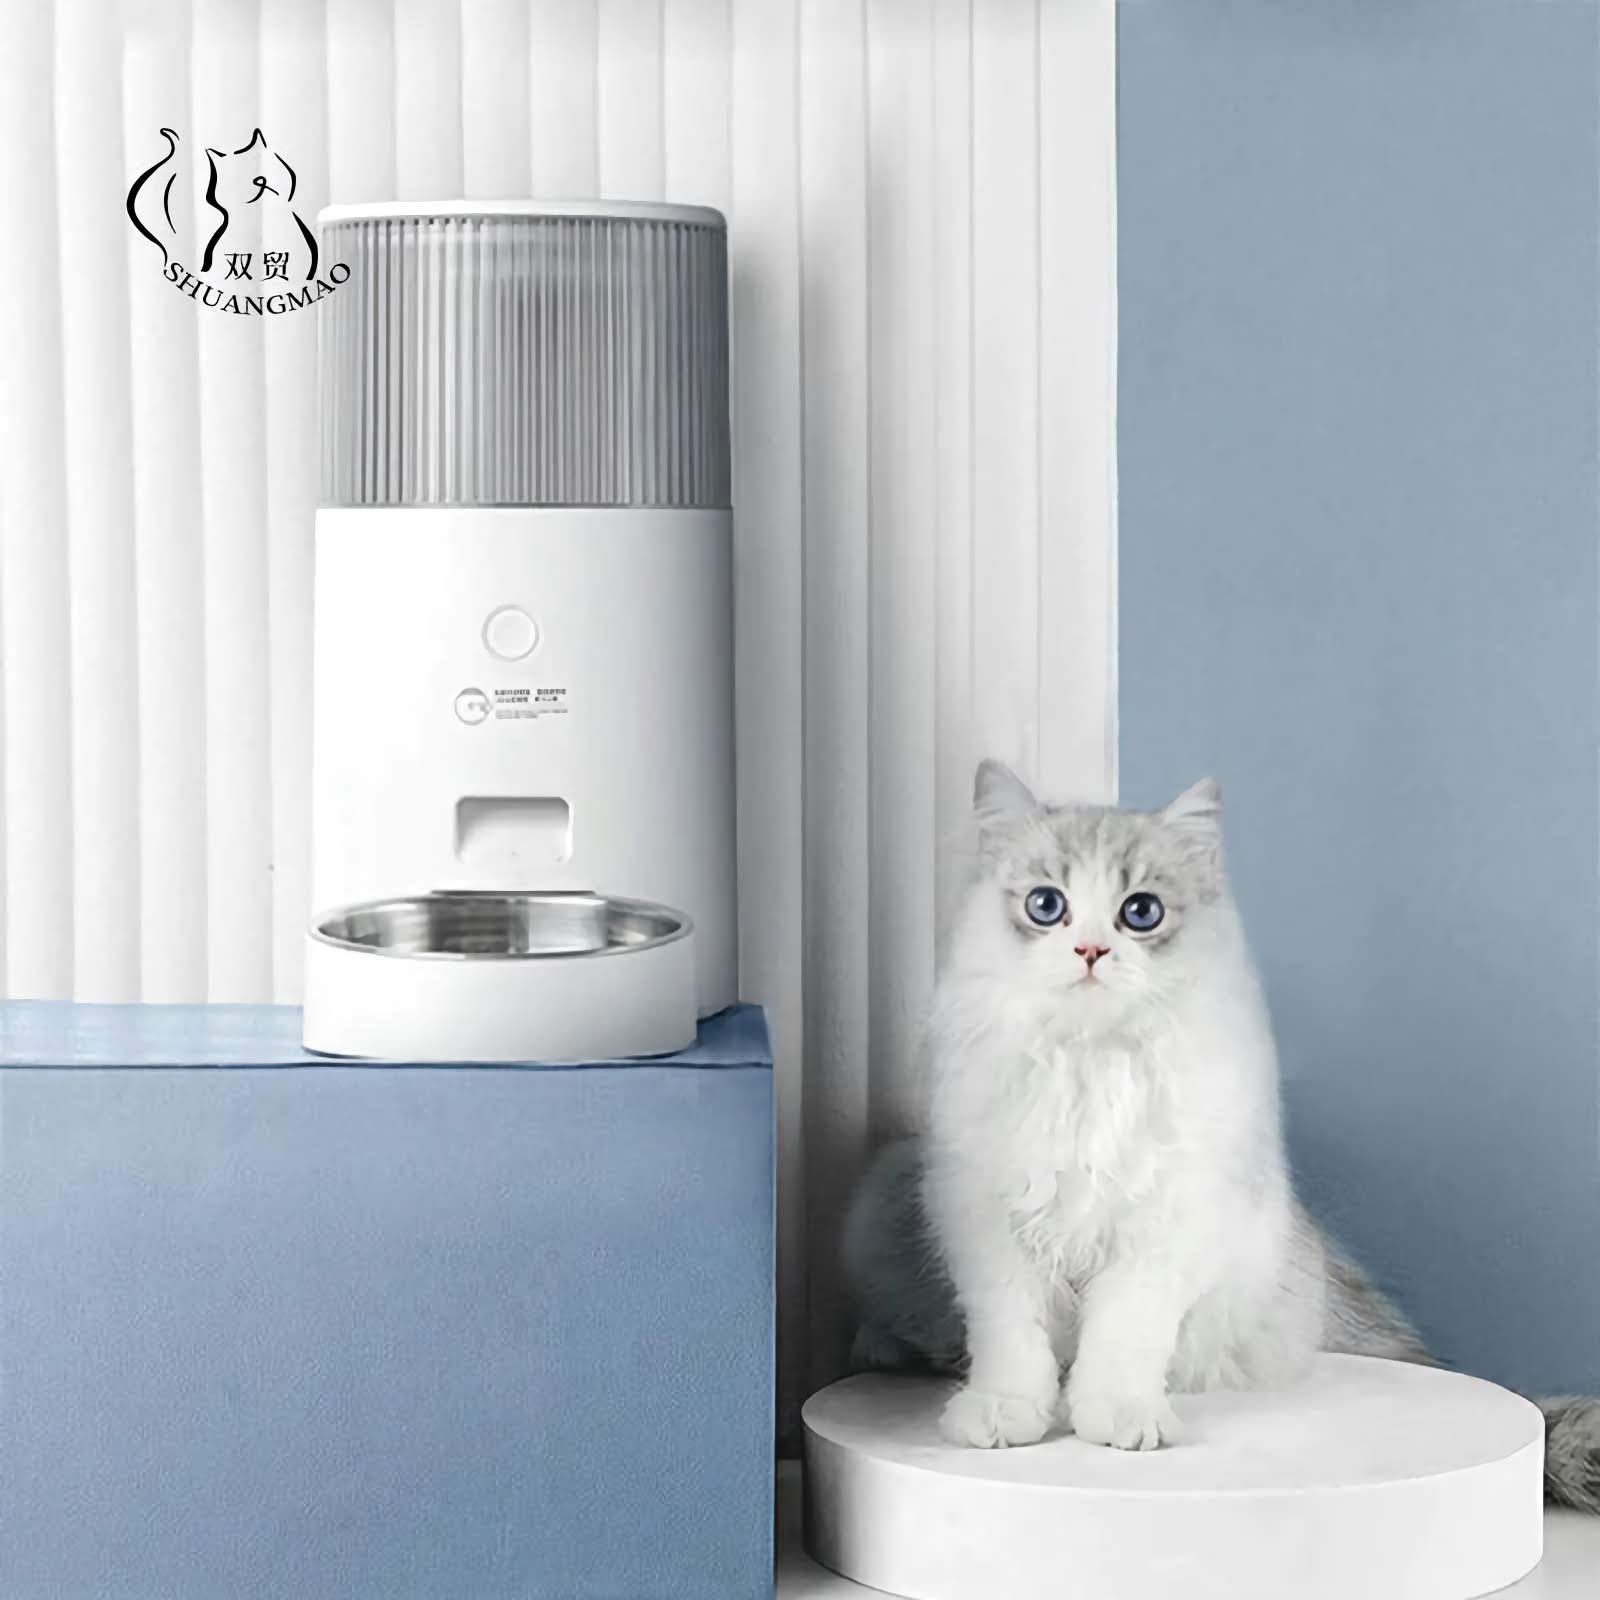 Automatic Pet Feeder (2.5L Capacity) For Dogs/Cats. Intelligent Feeding System - Snazzy Gear